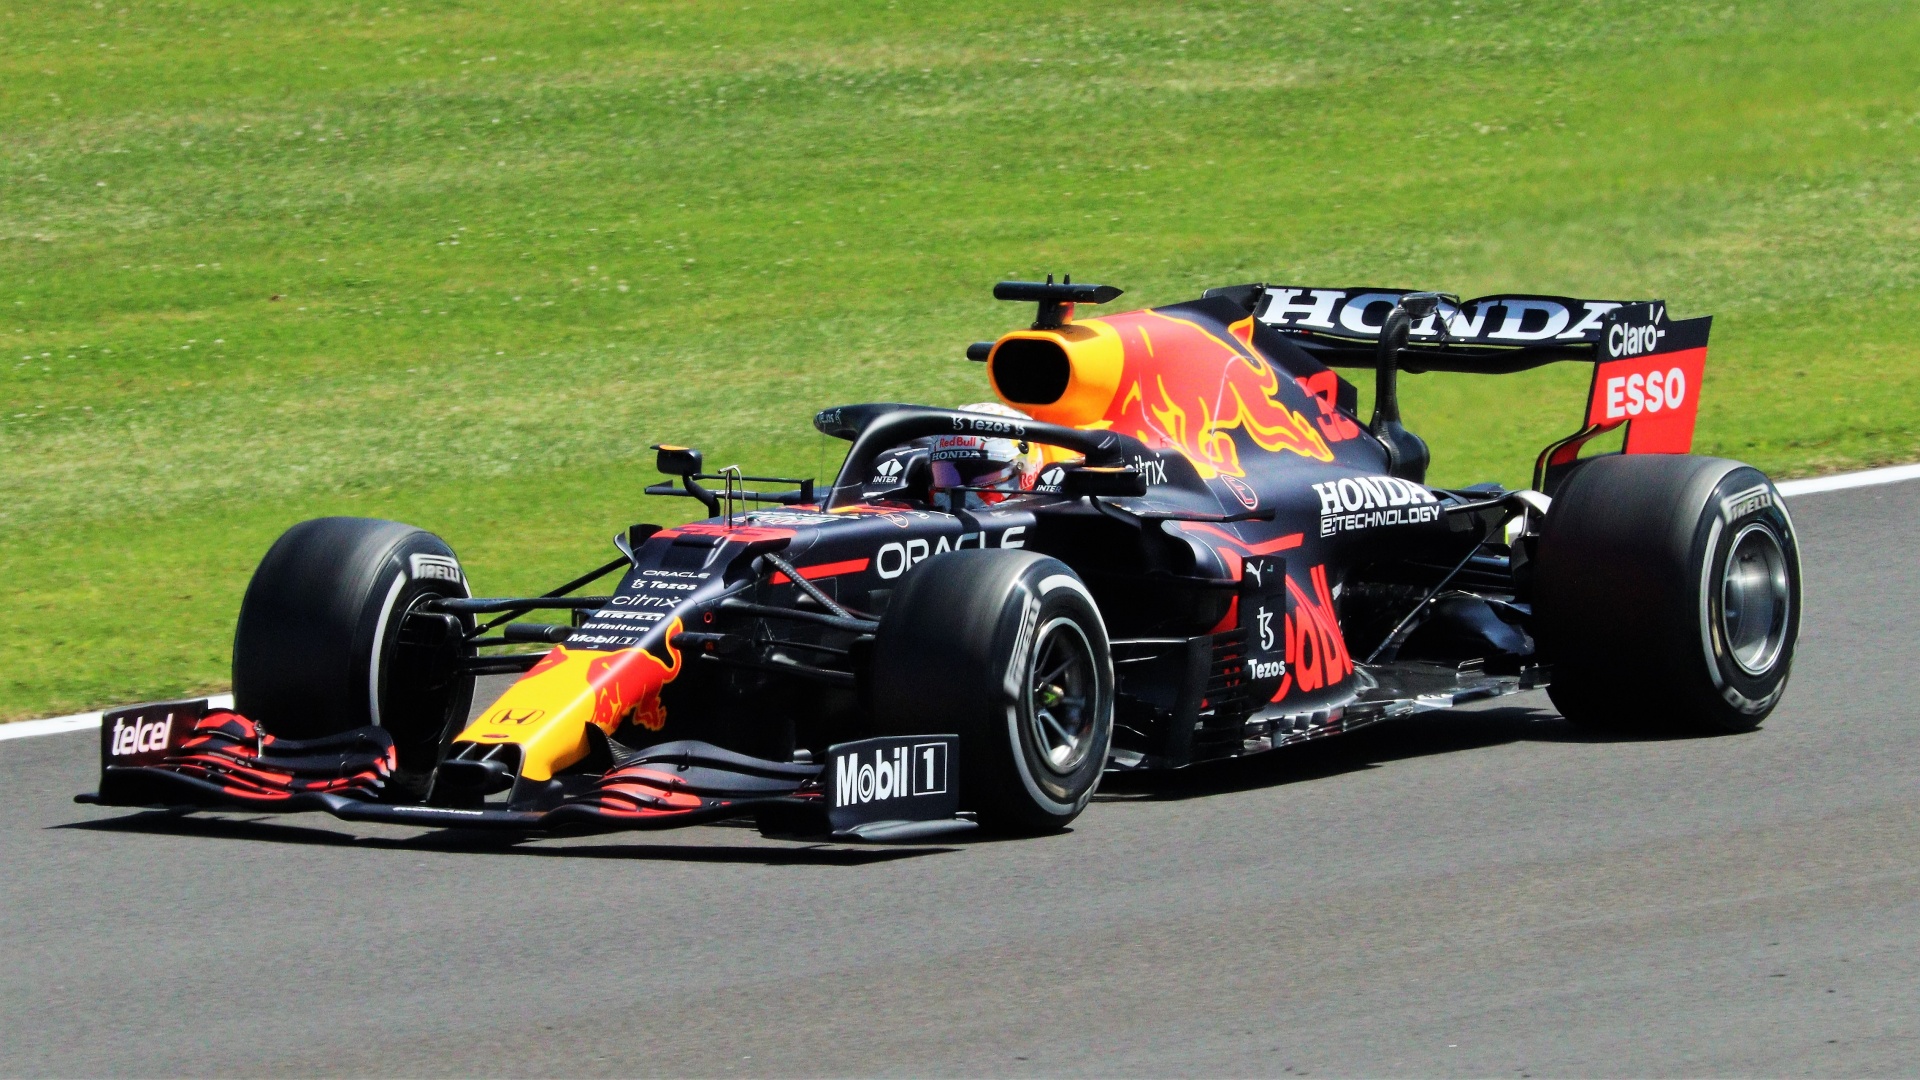 Max Verstappen racing for Red Bull at Silverstone